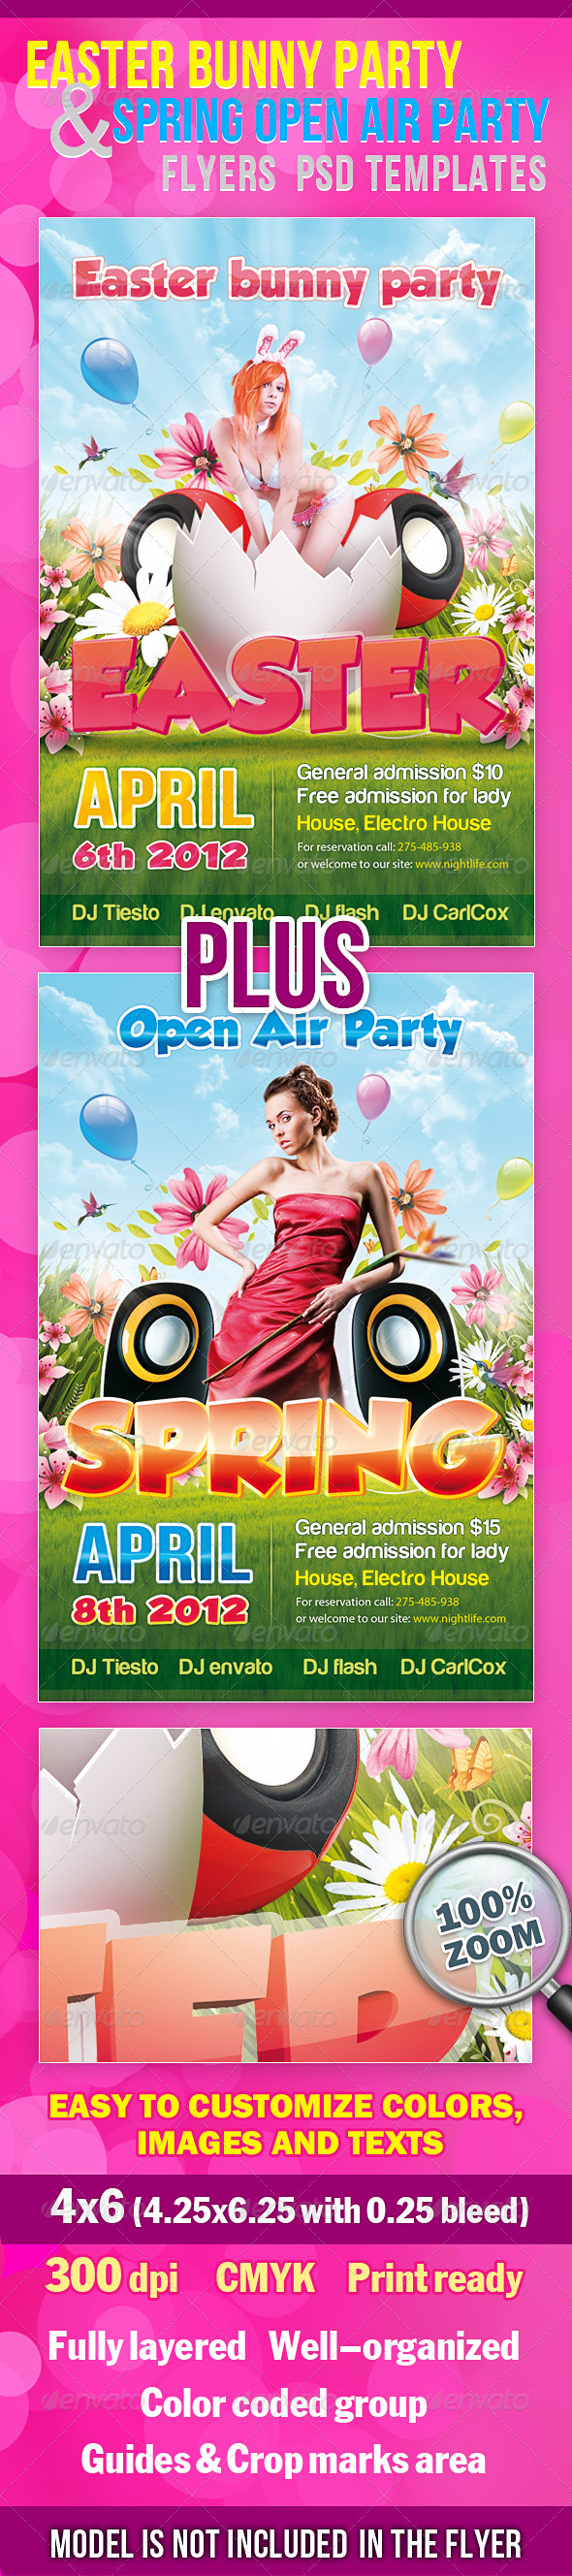 Easter Party And Spring Party Flyers PSD Templates